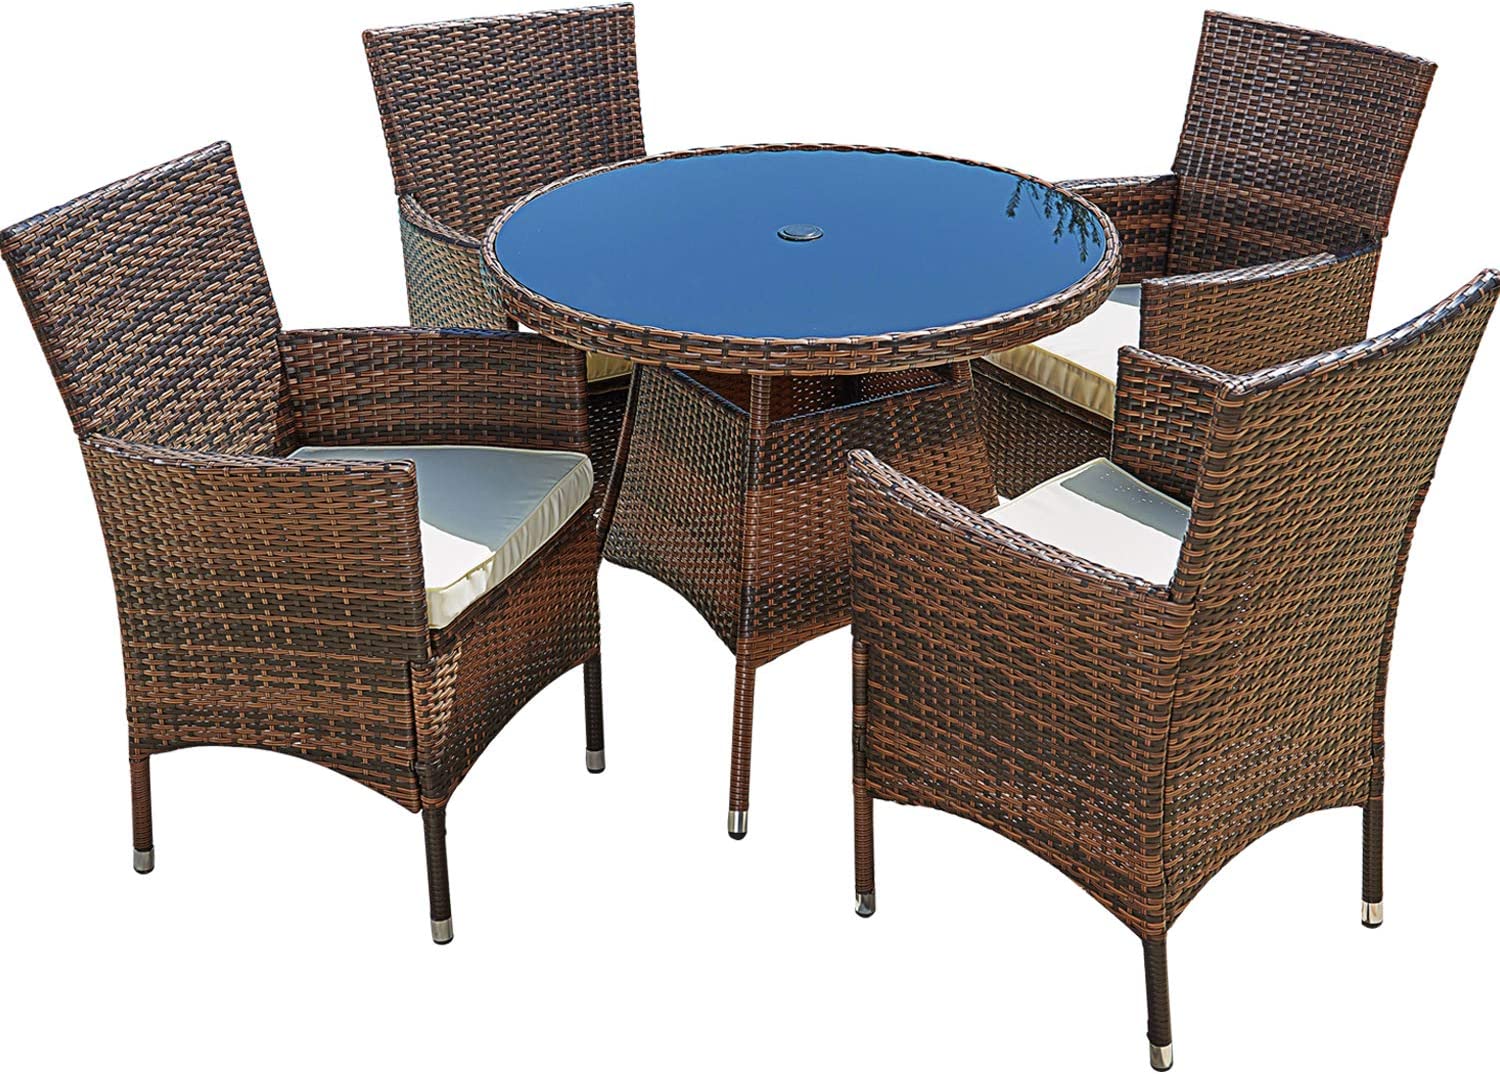 SUNCROWN Outdoor Furniture All-Weather Square Wicker Dining Table and Chairs for 4 (5-Piece Set) Washable Cushions, Patio, Backyard, Porch, Garden, Poolside, Tempered Glass Tabletop, Modern Design - image 2 of 6